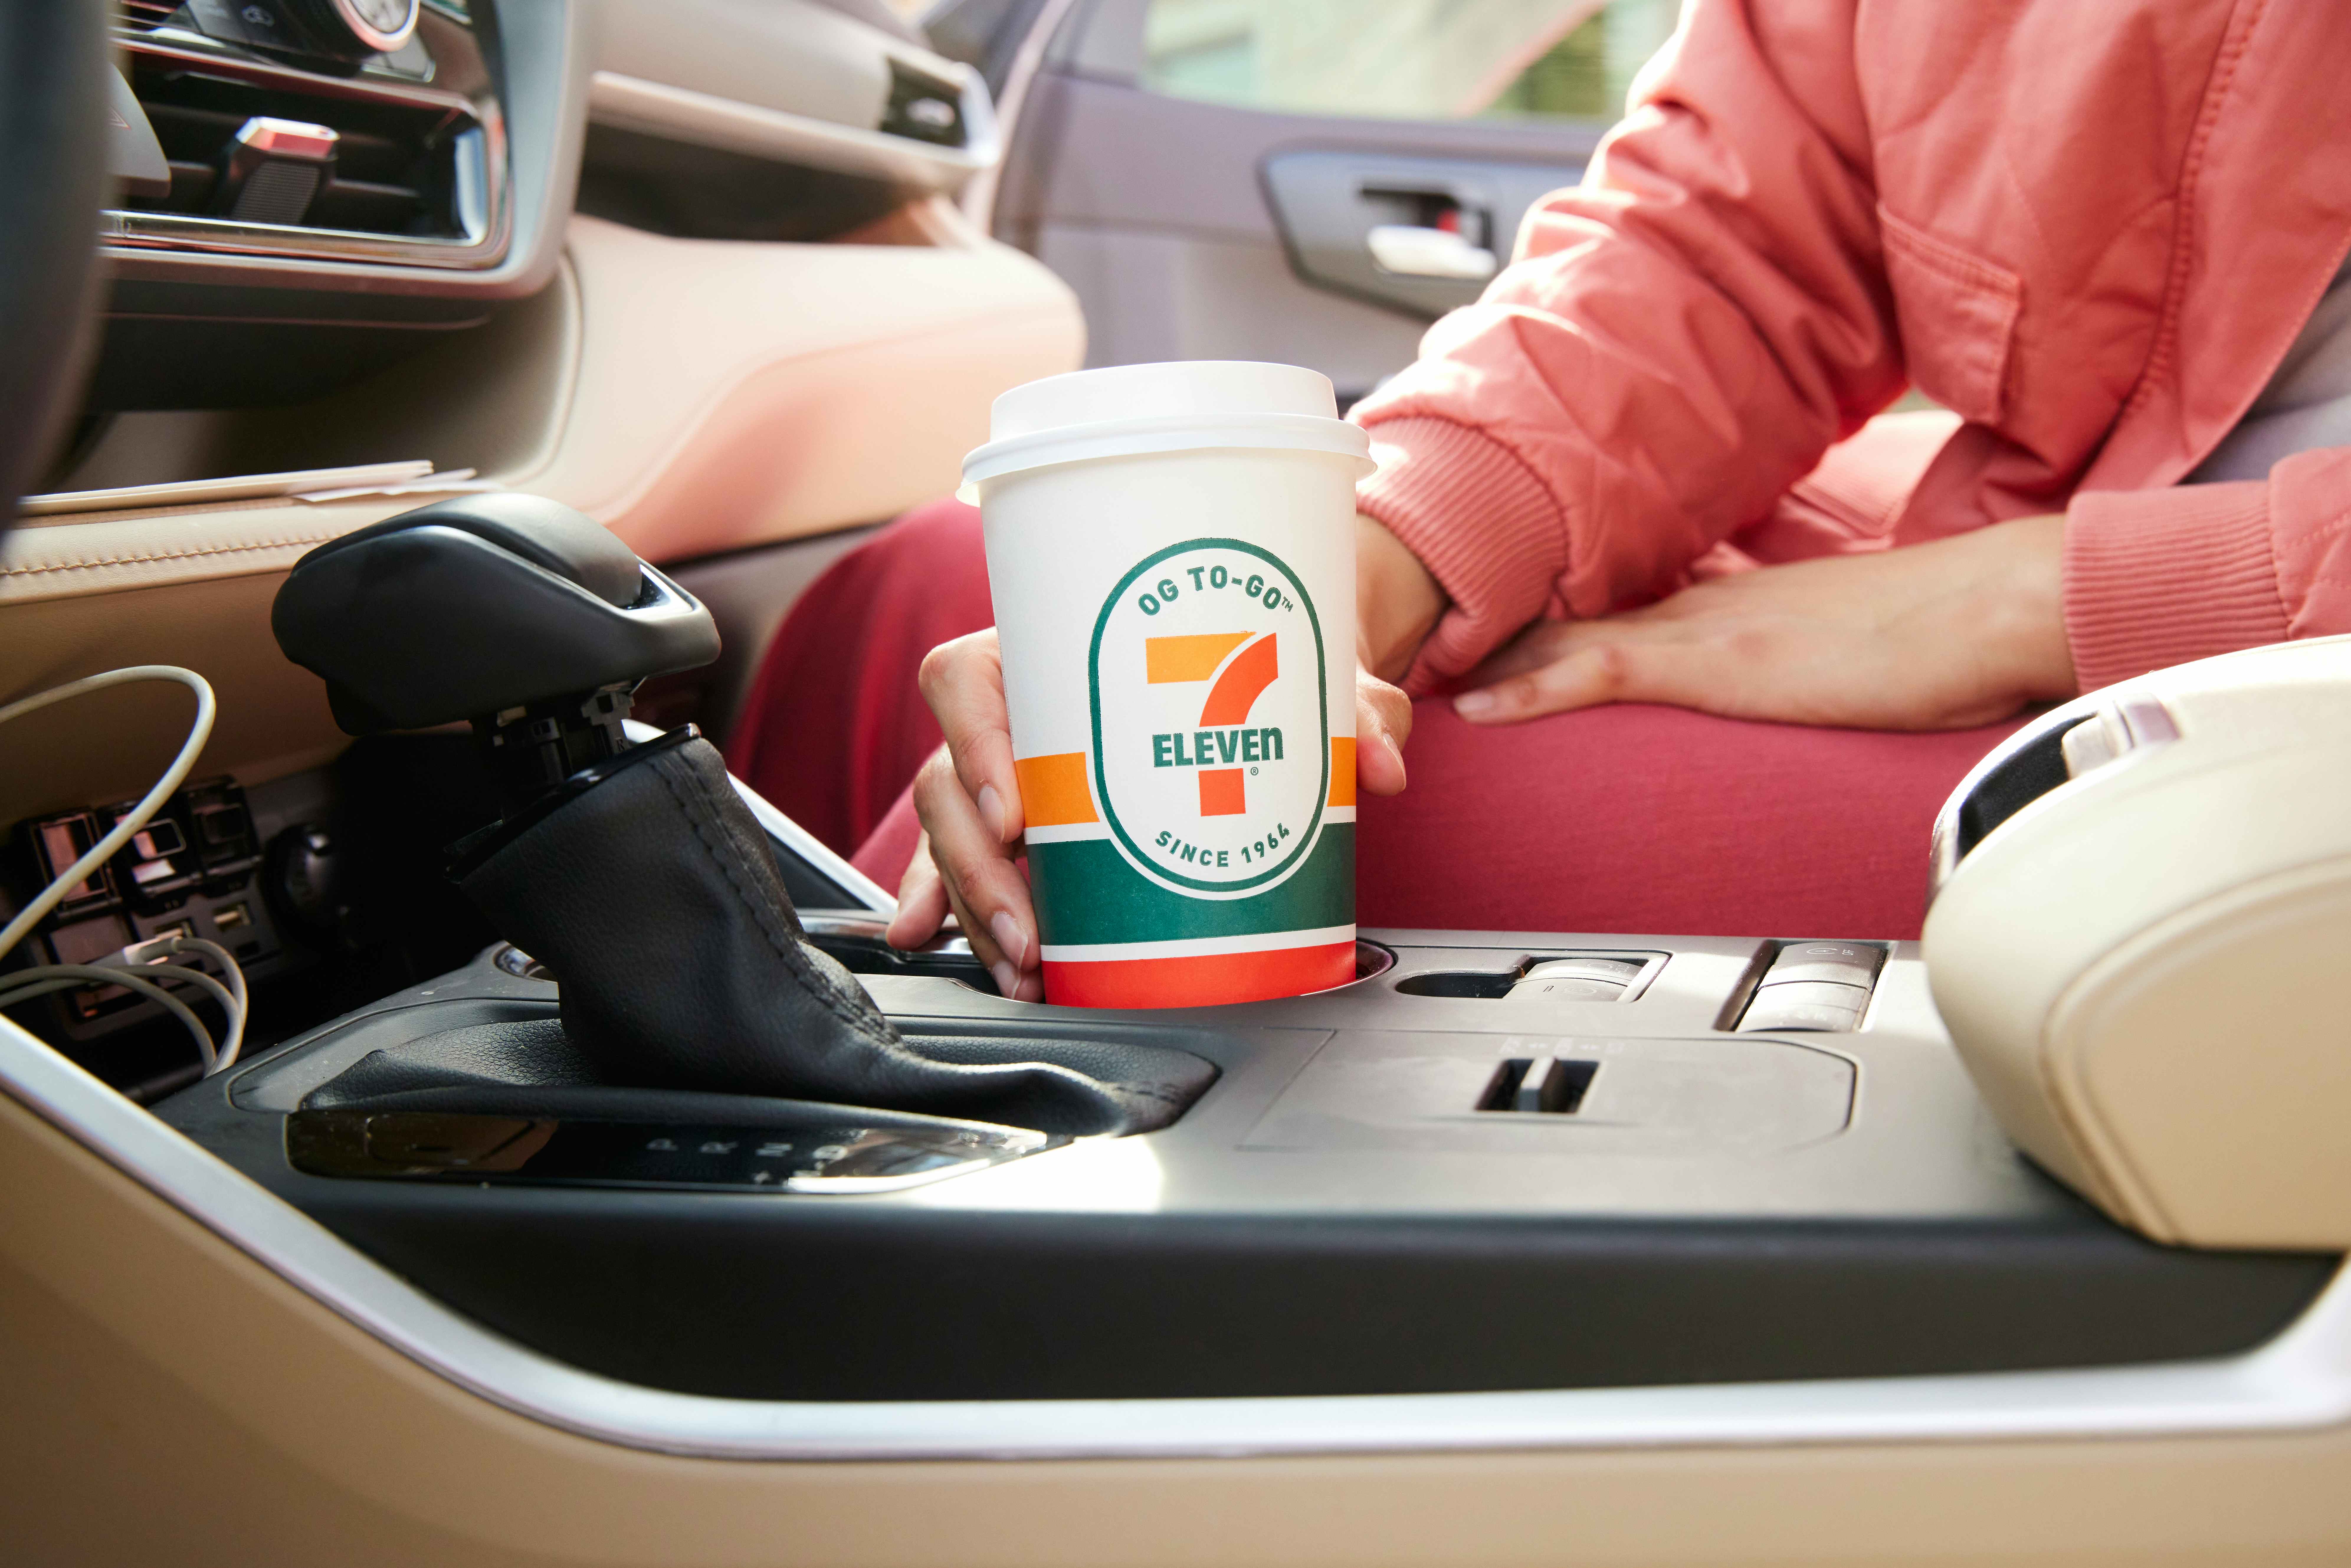 A person holding a 7-Eleven coffee cup inside a vehicle.